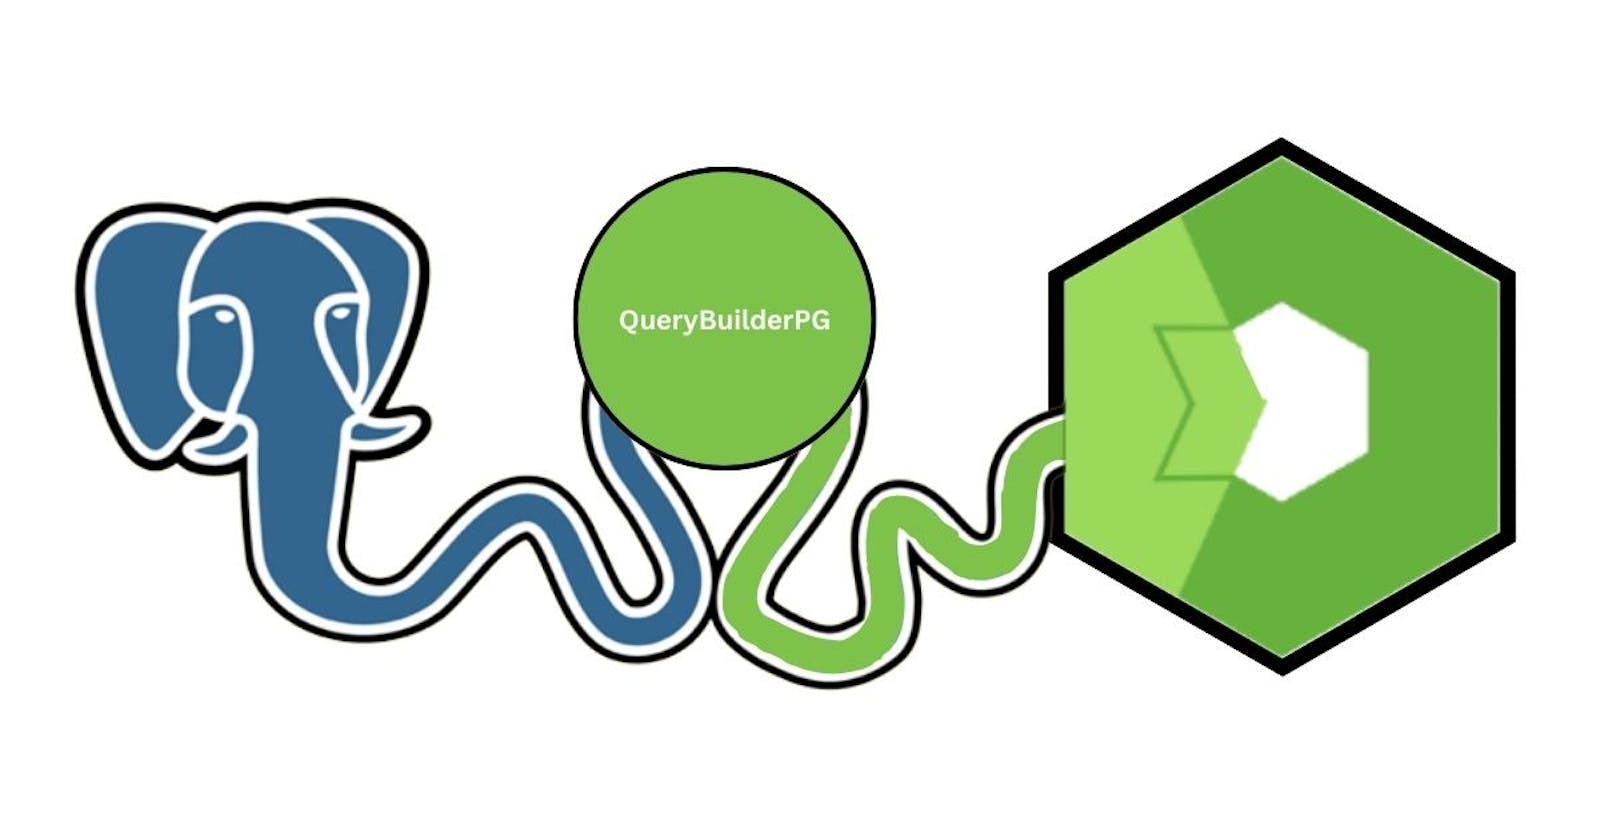 How to use the PostgreSQL database in Total.js? QueryBuilderPG